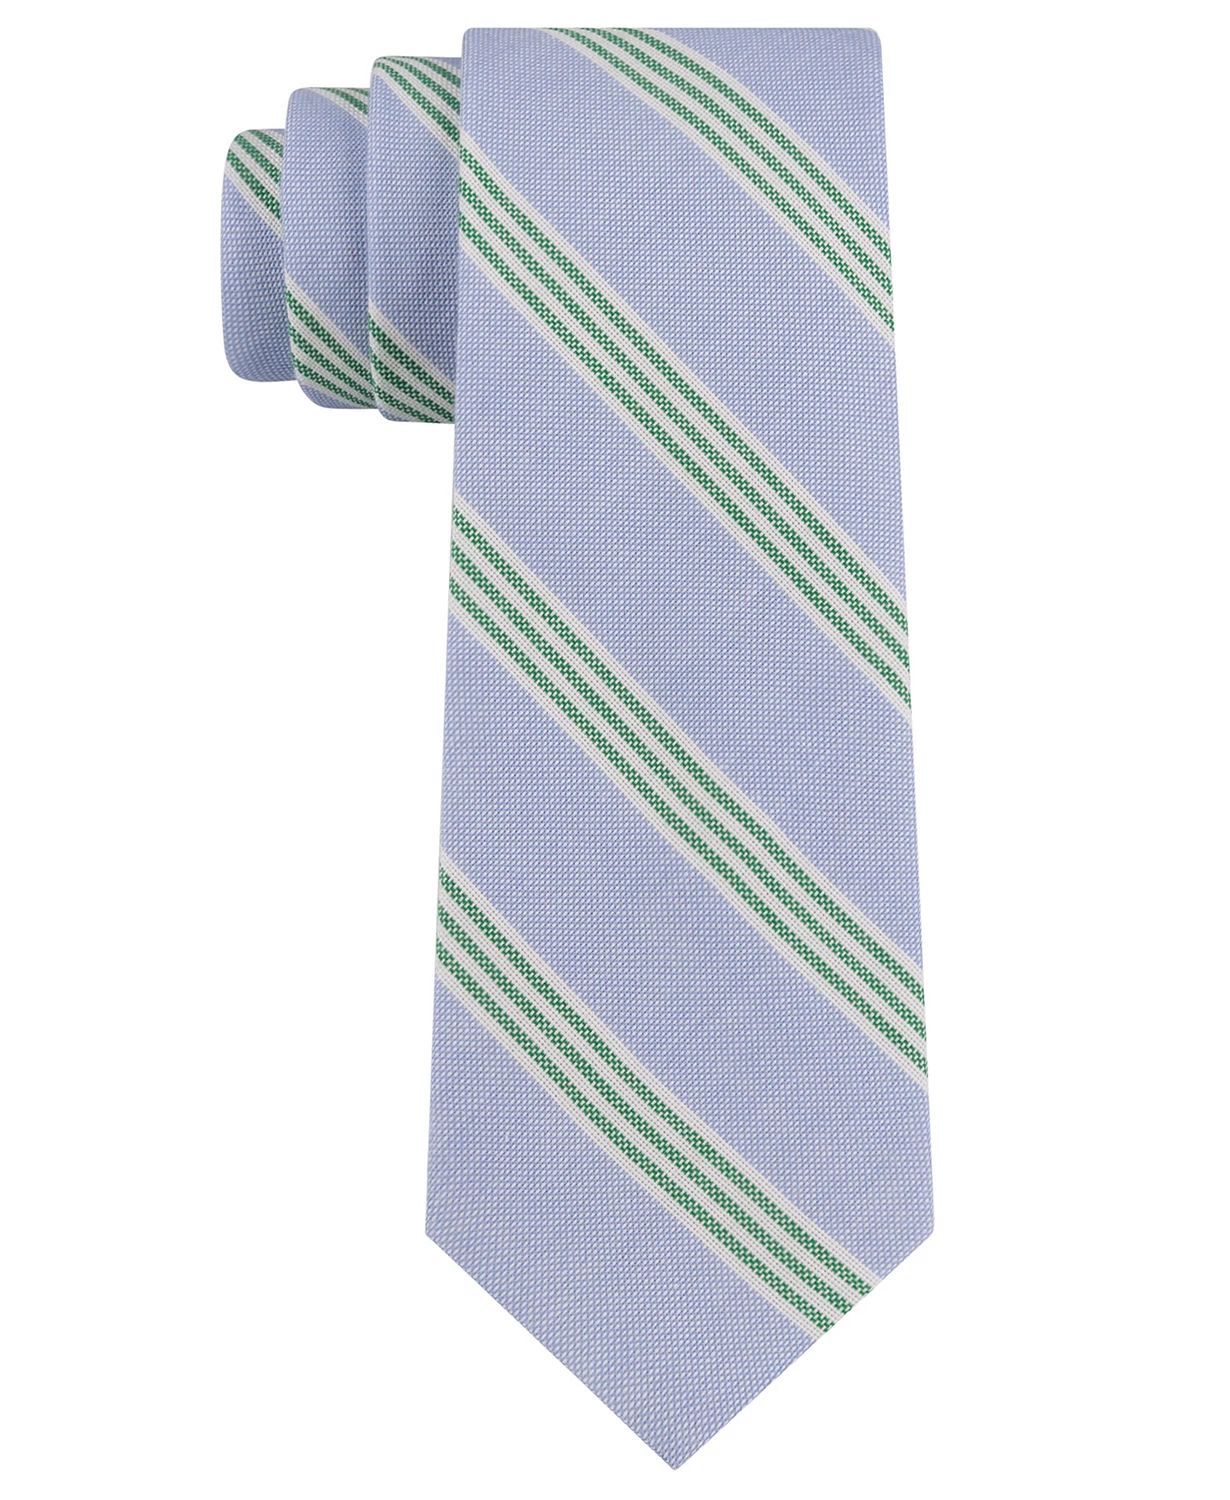 Color: Blues Size: One Size Pattern: Striped Type: Tie Width: Skinny (Material: 100% Cotton